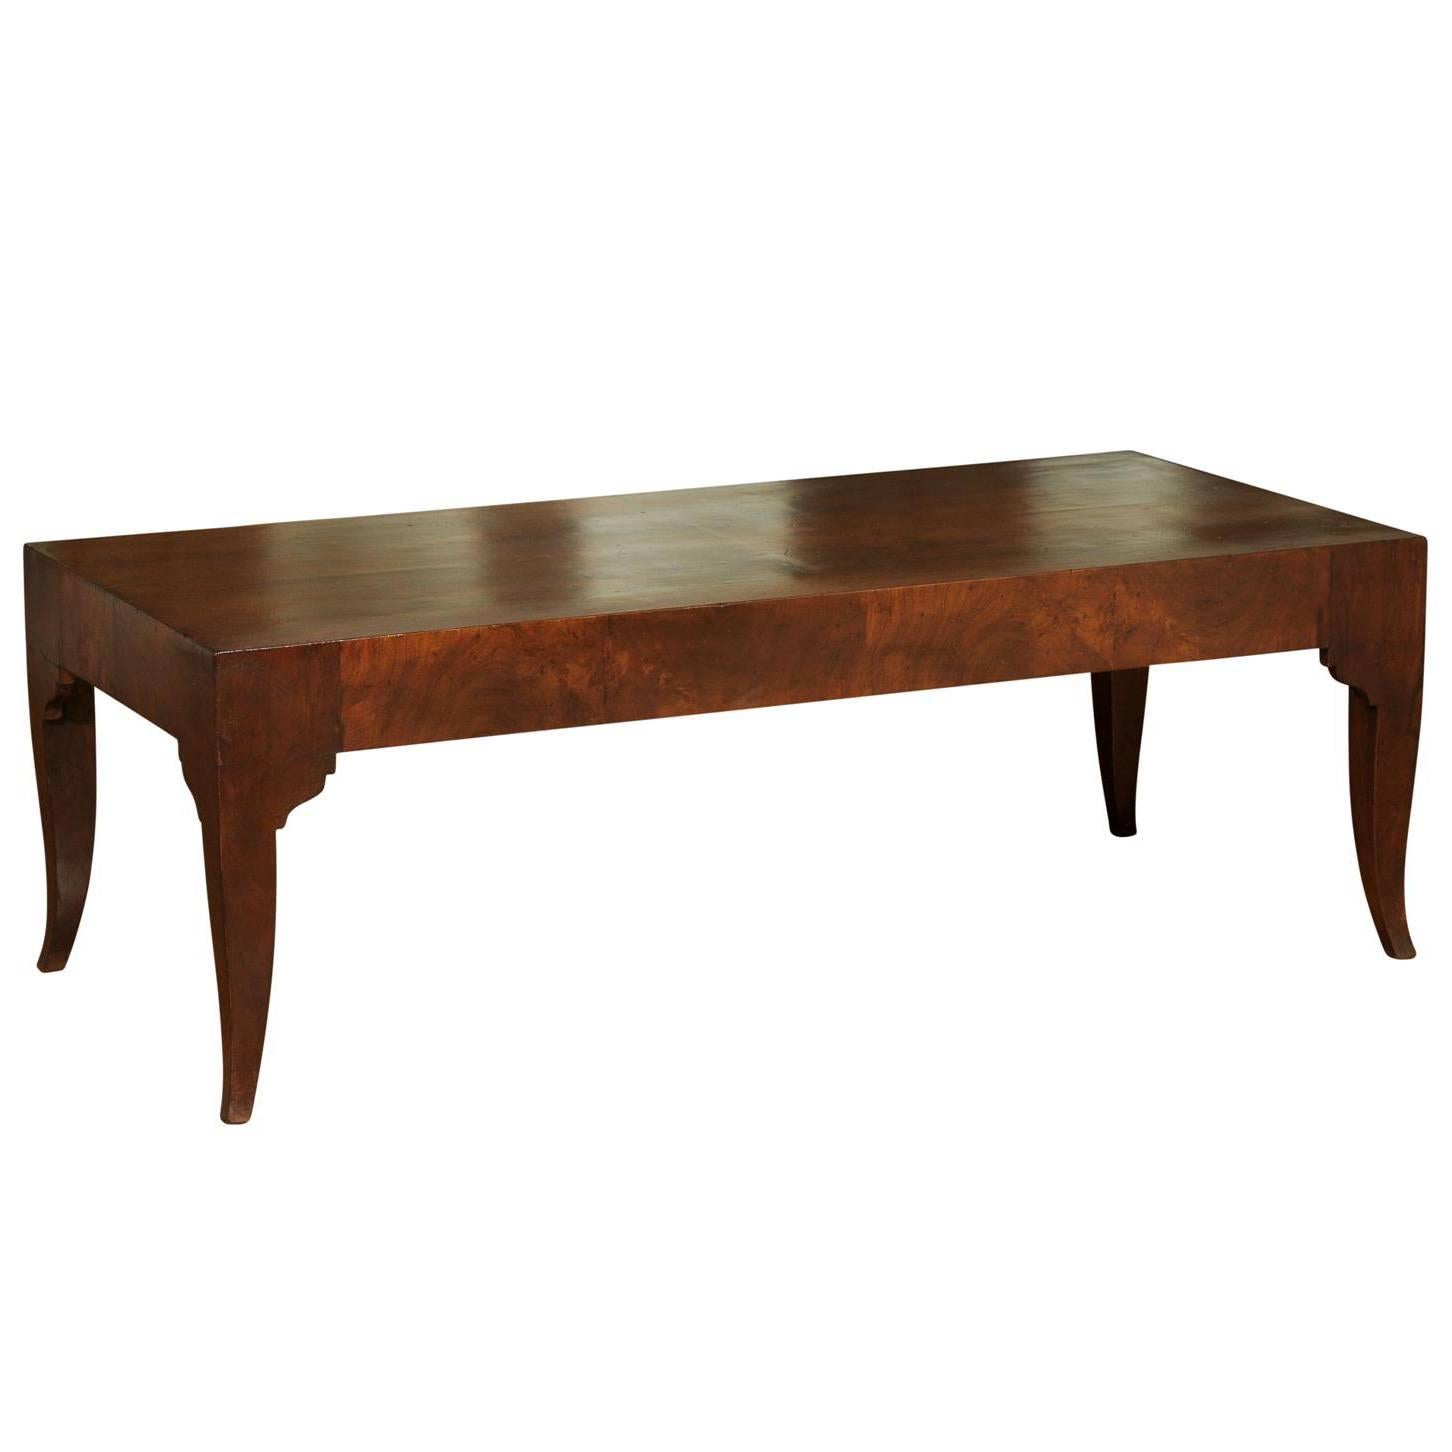 Stunning Restored Vintage Coffee Table in Bookmatched Walnut For Sale